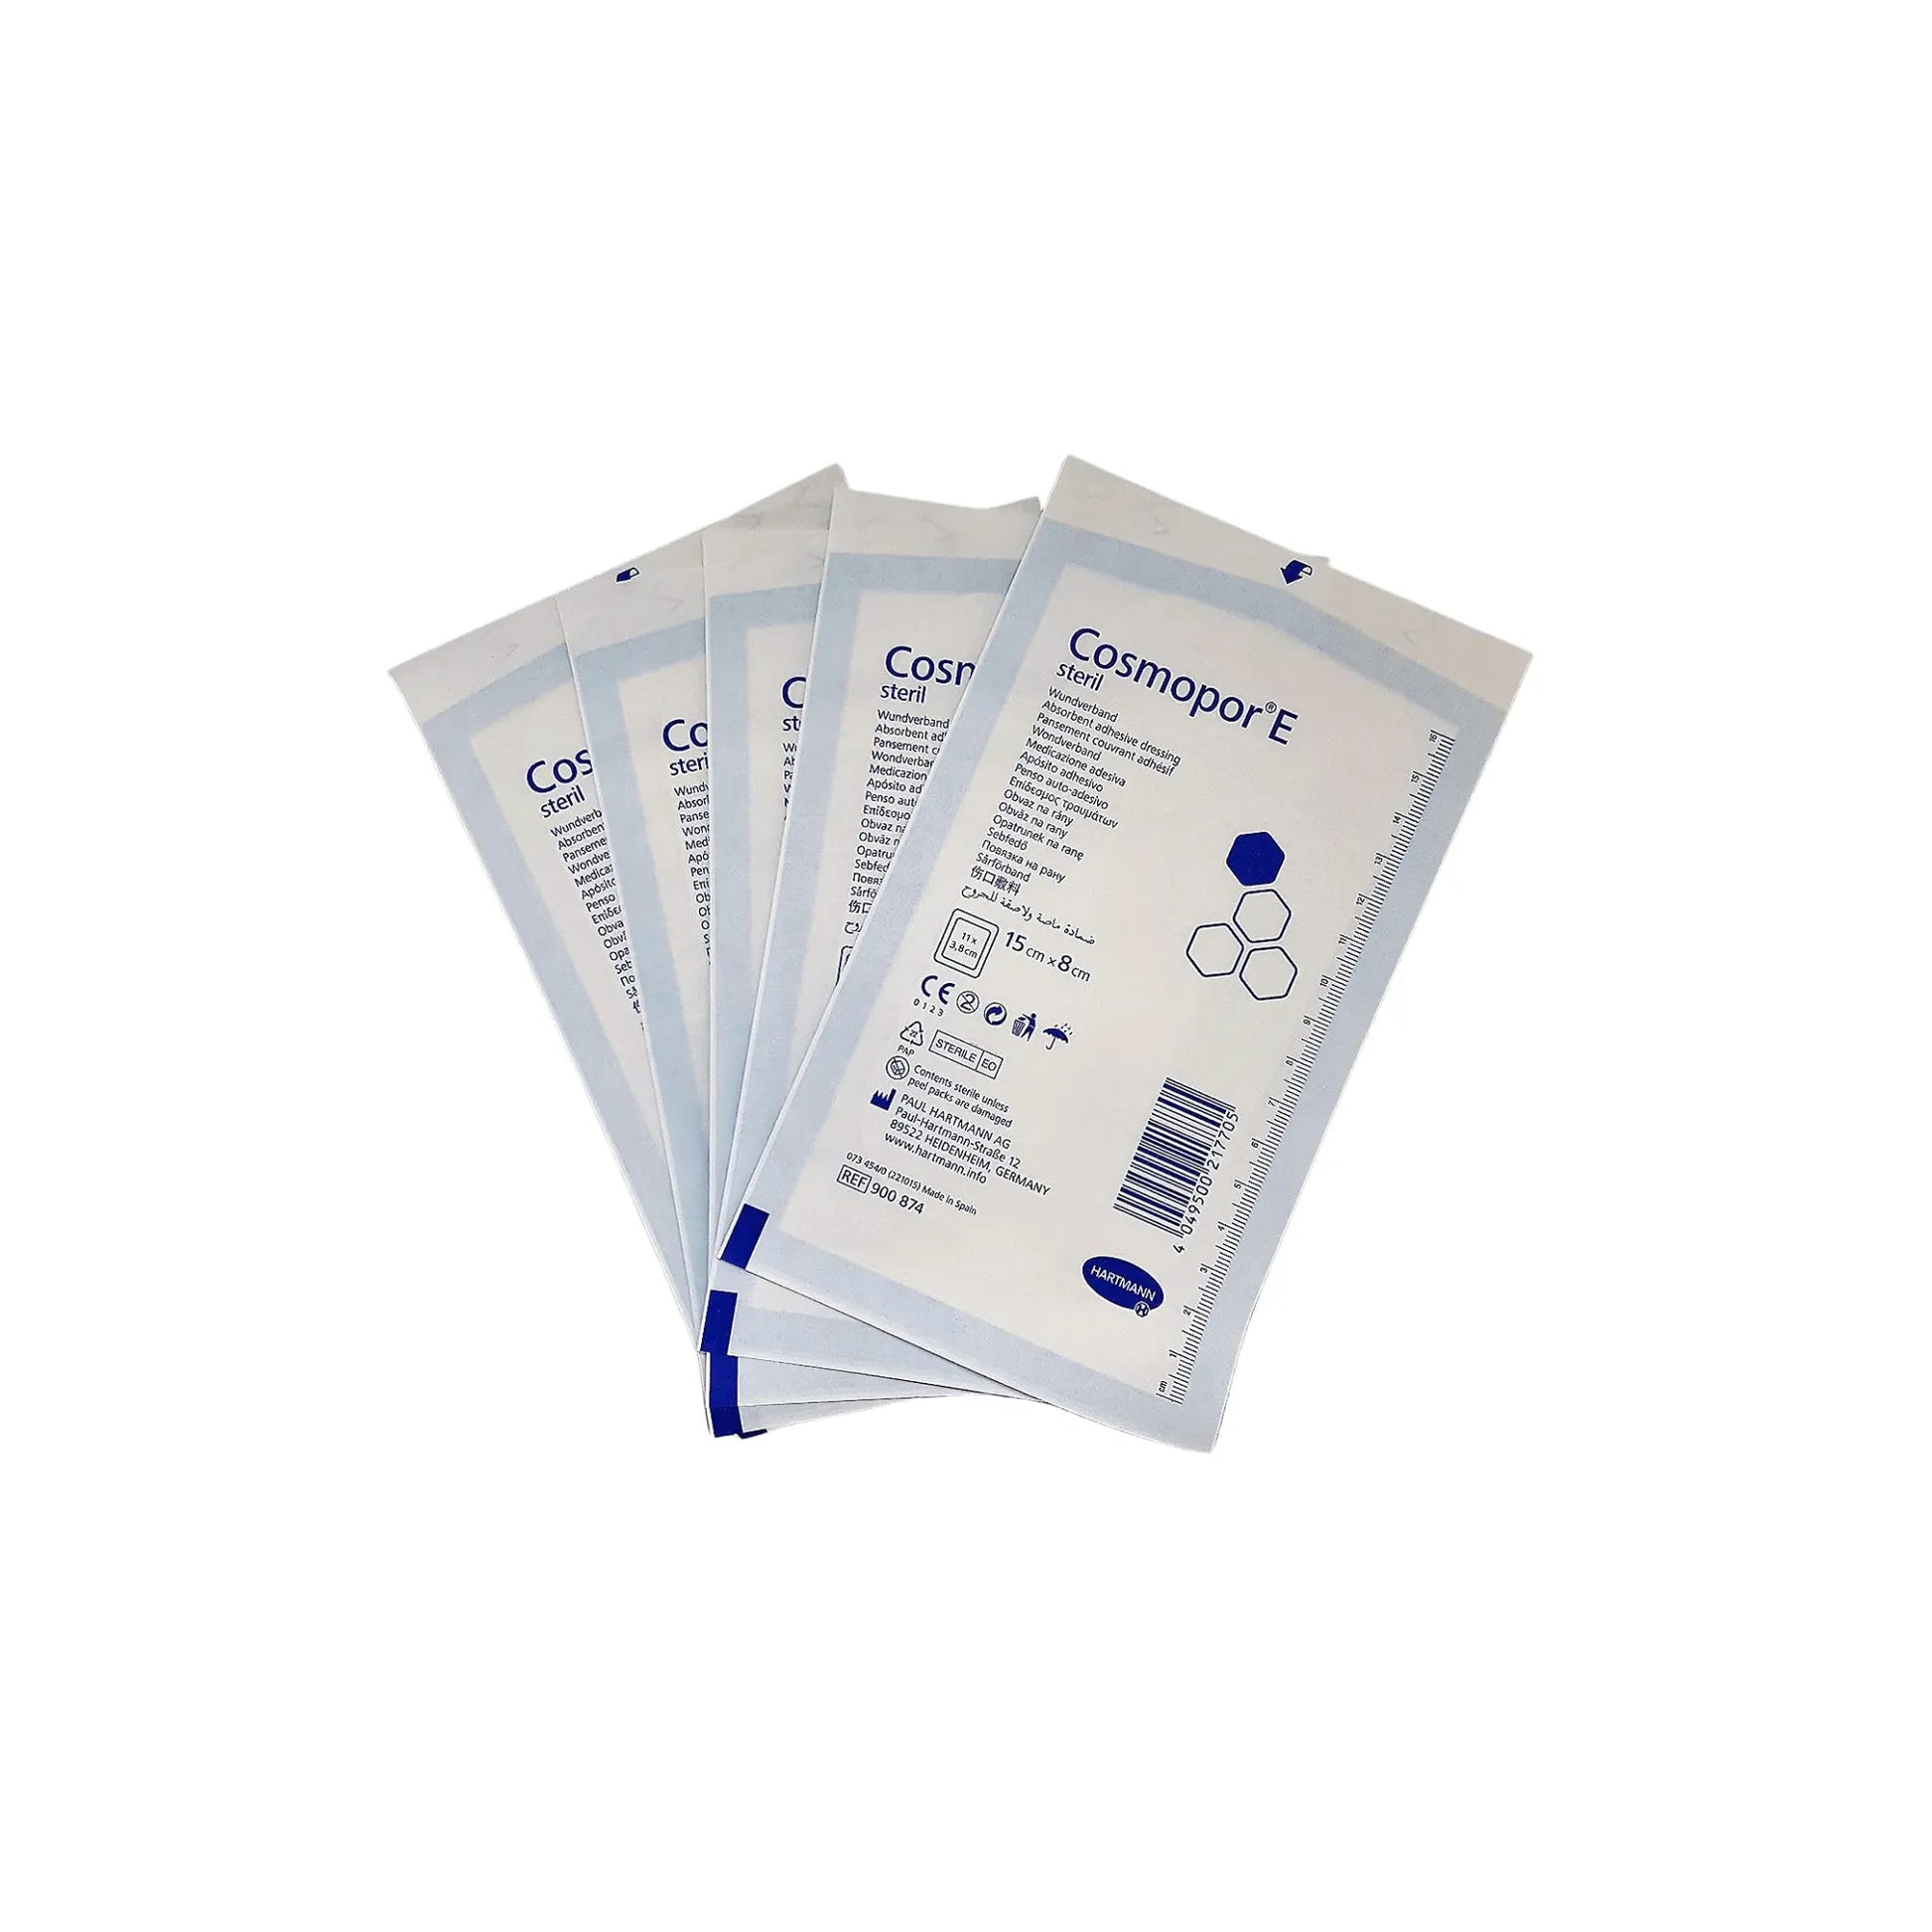 Cosmopor E Adhesive Sterile Mixed Sizes First Aid Refill Pack Dressings - Arc Health Nutrition